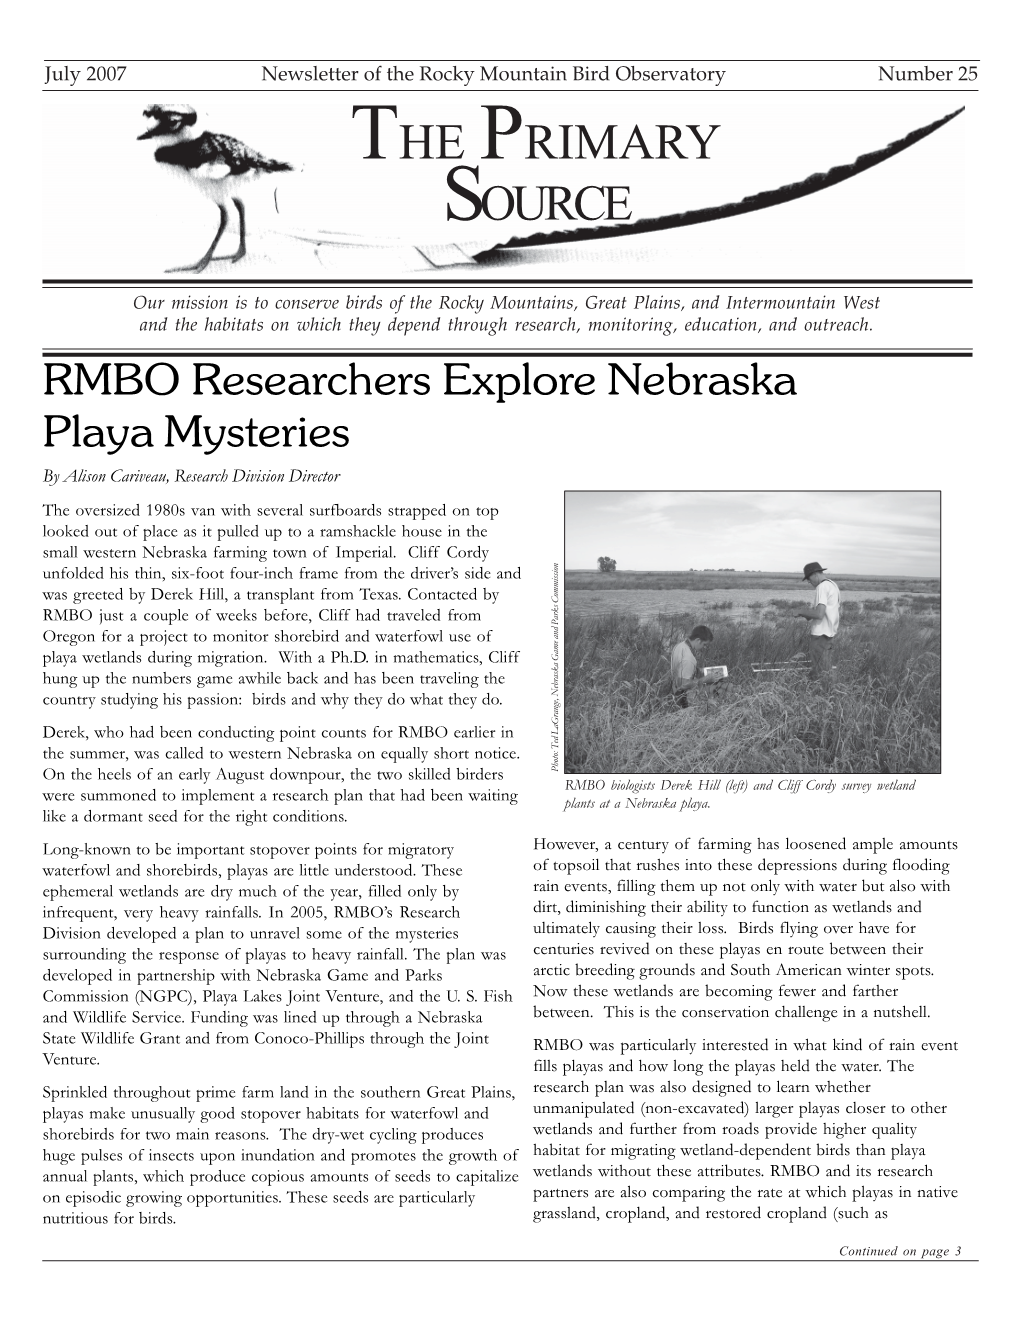 July 2007 Newsletter of the Rocky Mountain Bird Observatory Number 25 the PRIMARY SOURCE